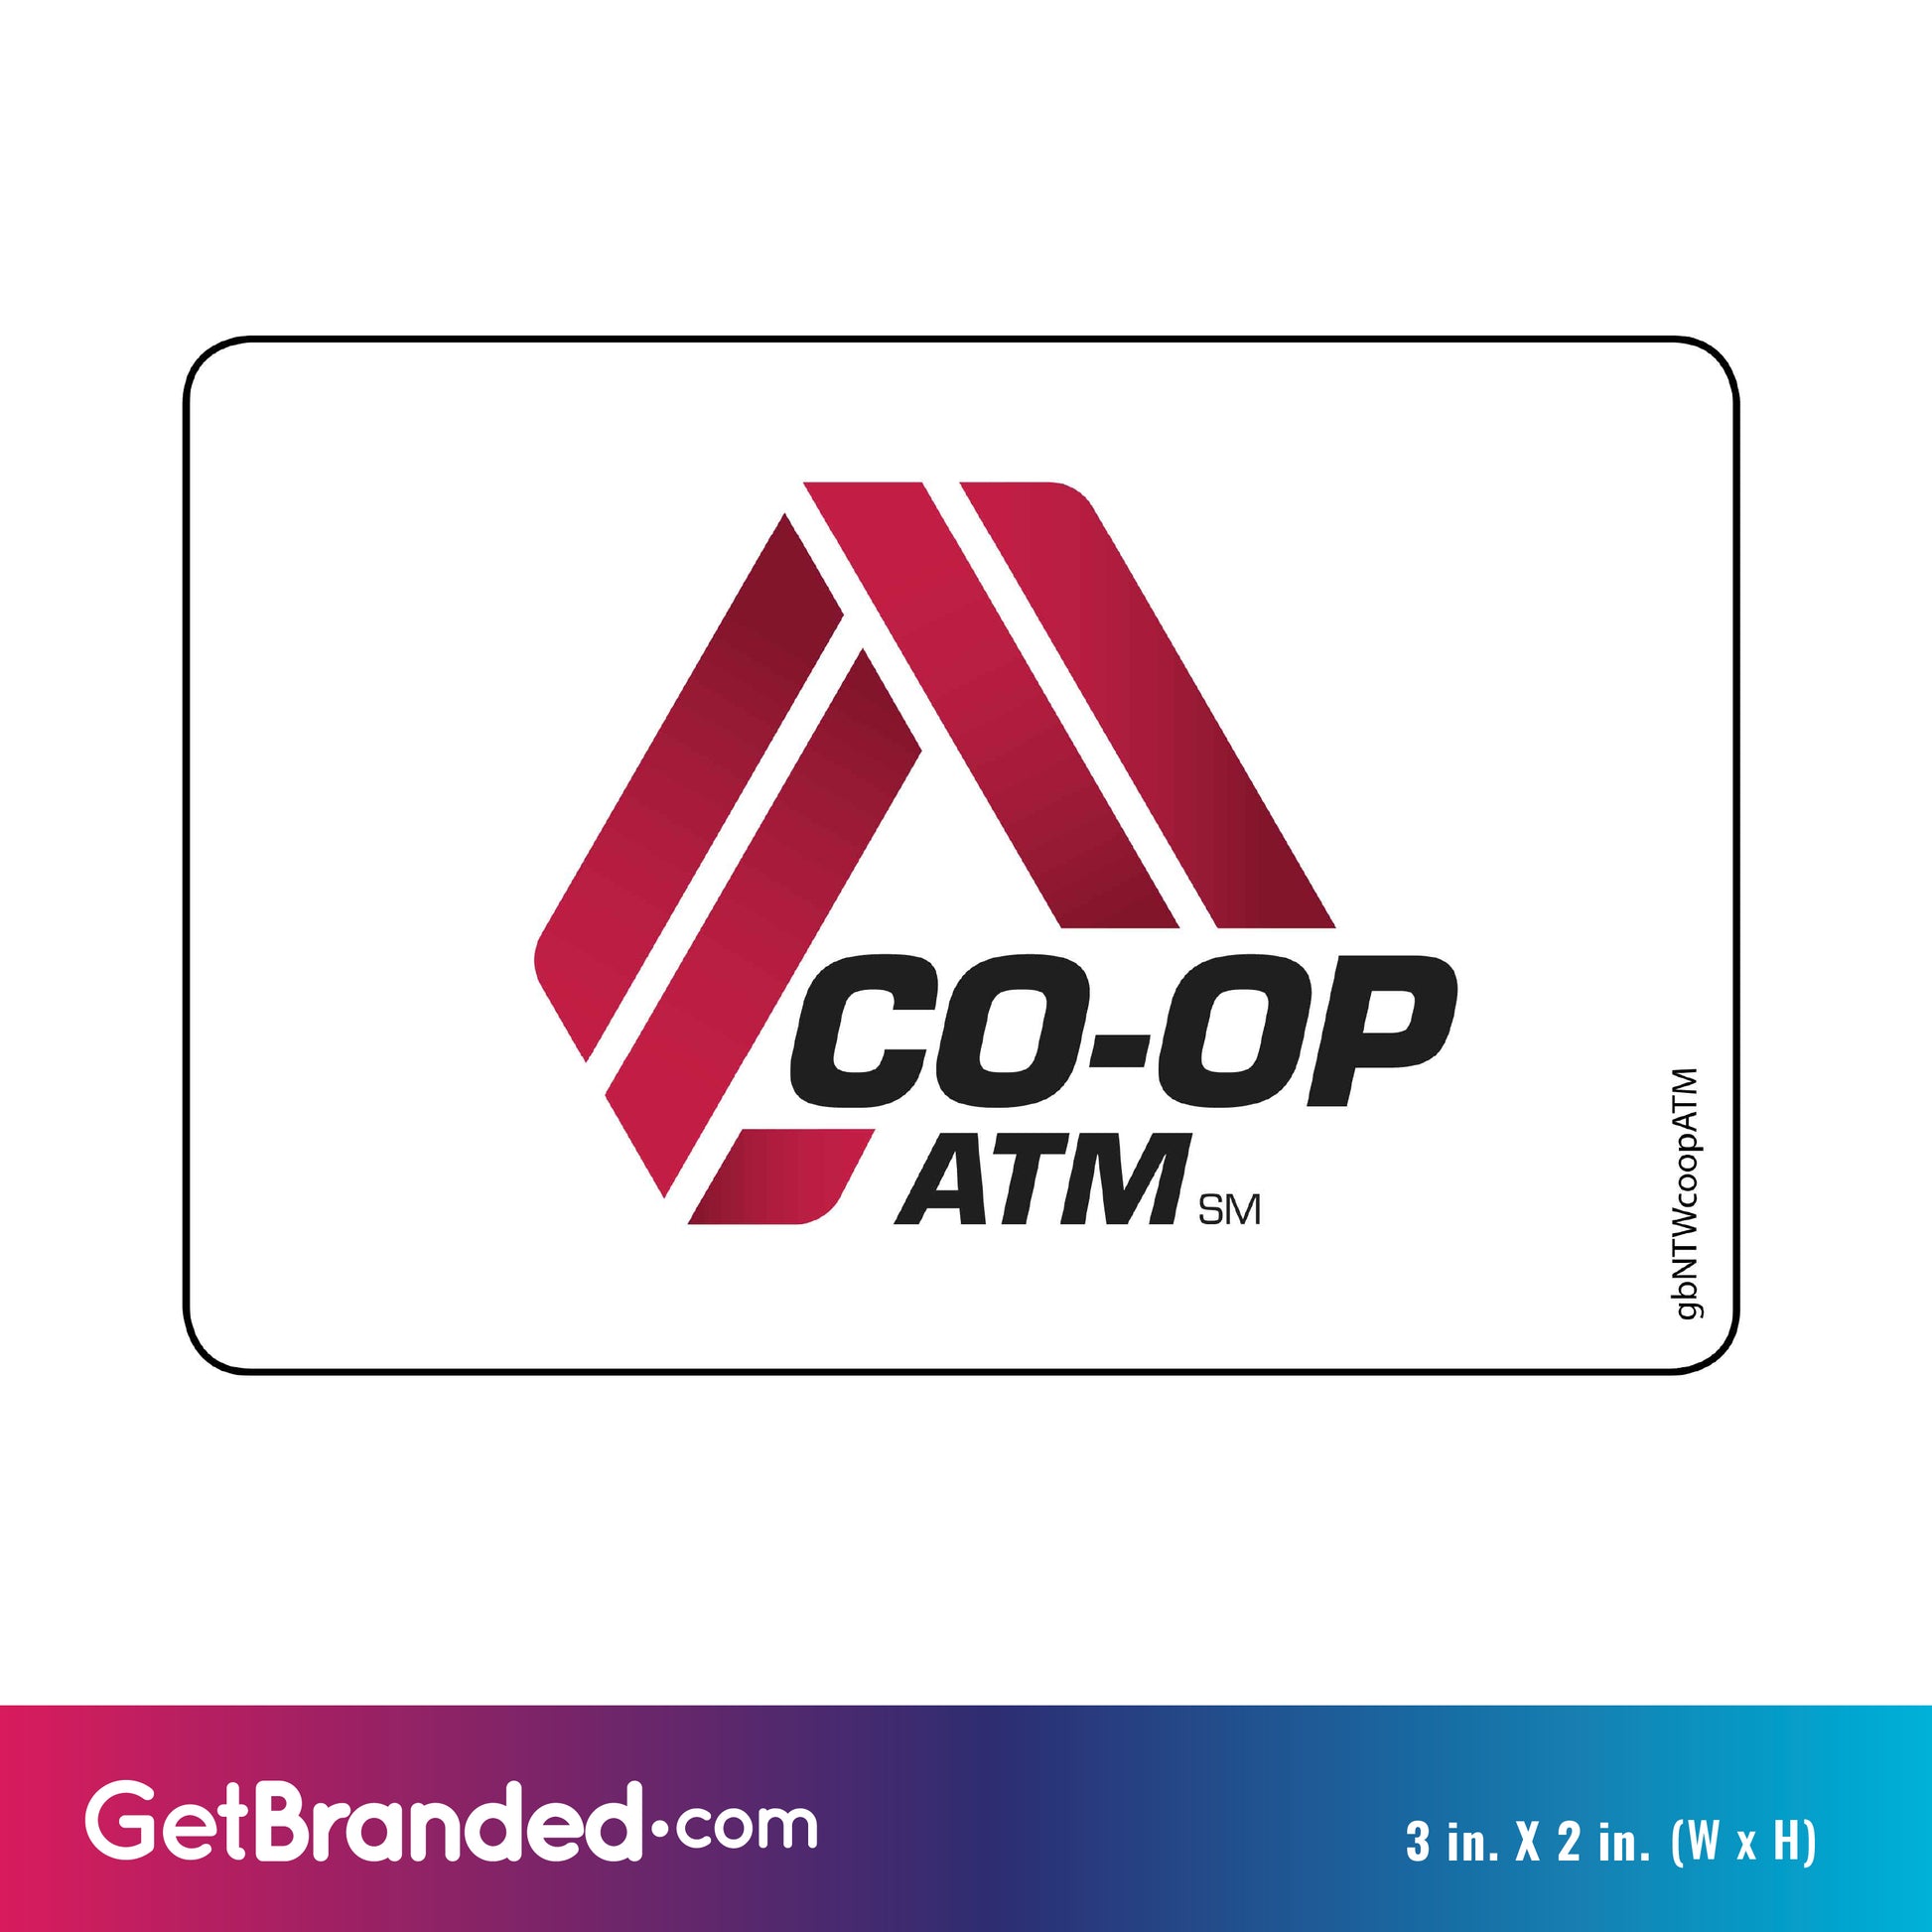 Single Network Decal, Co-op ATM size guide.